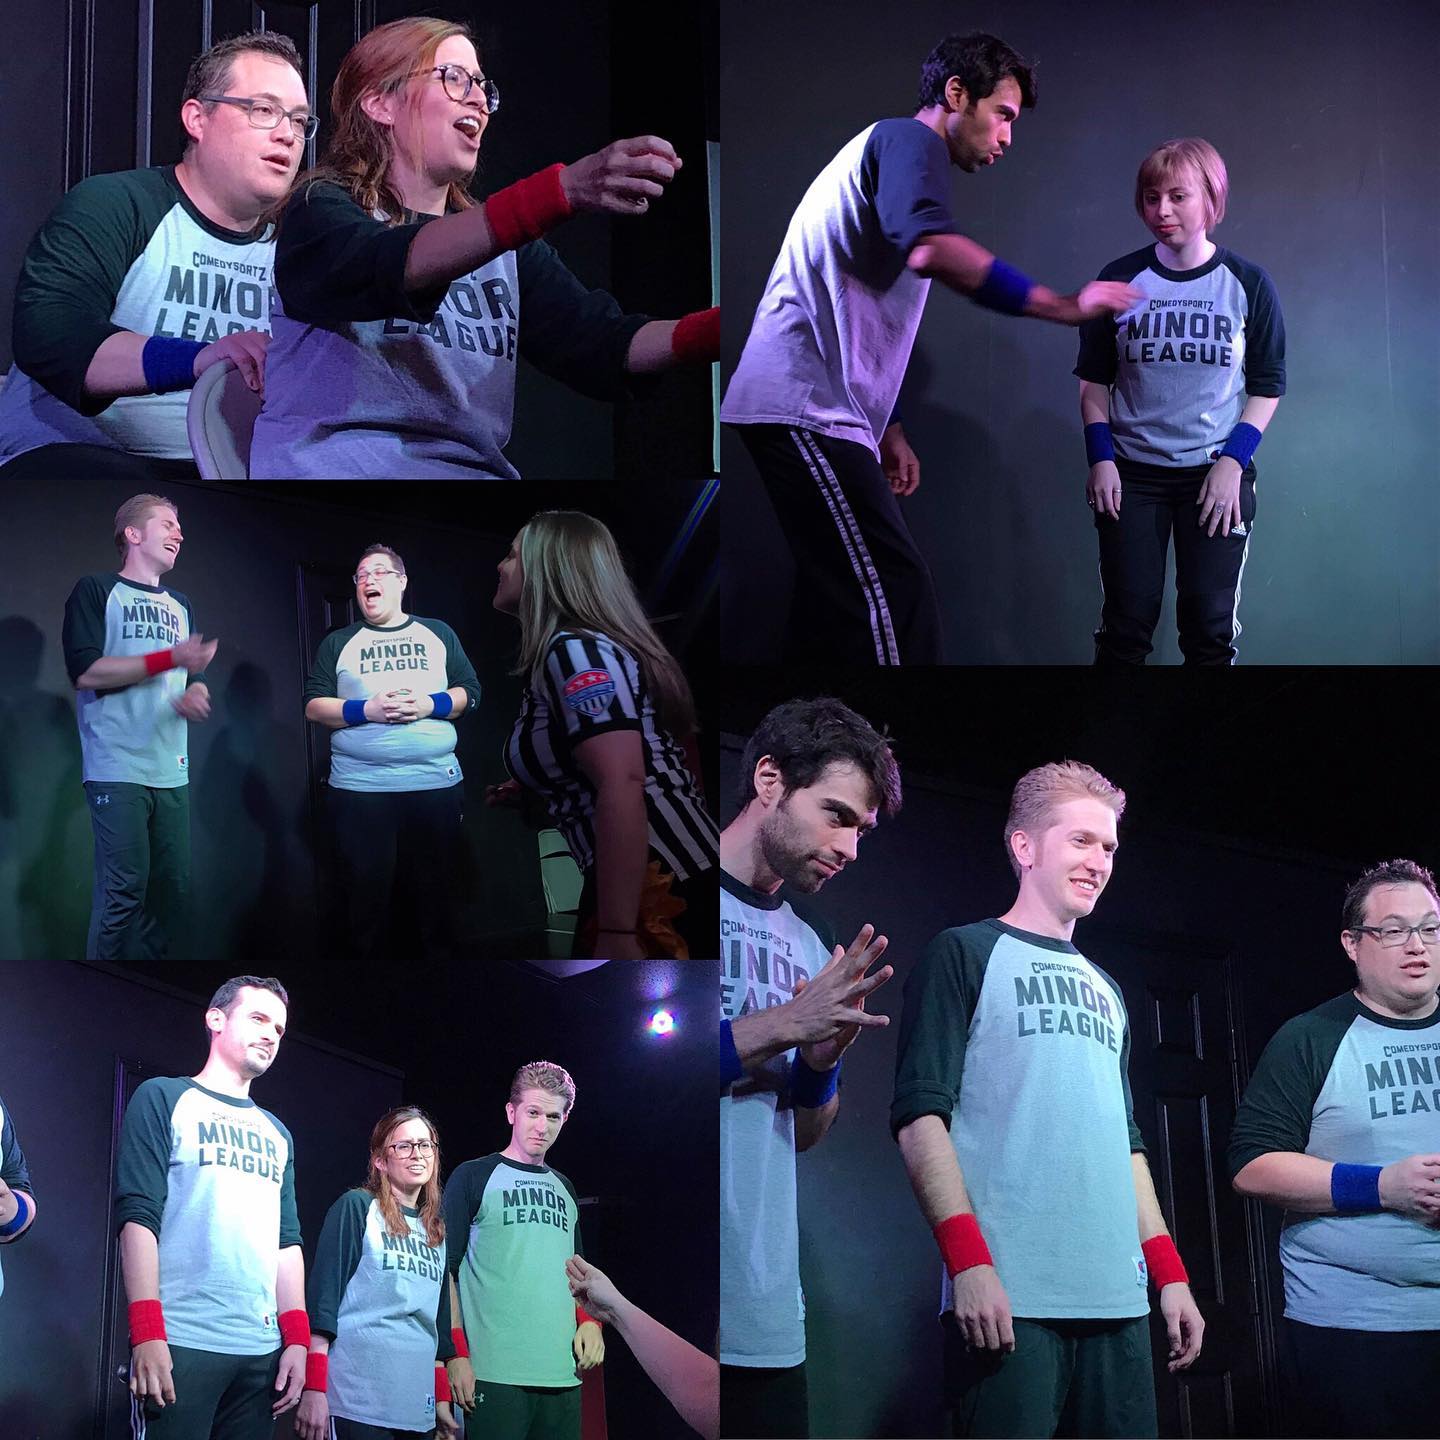 Watch the next generation of ComedySportz All Stars in our Minor League Matches.